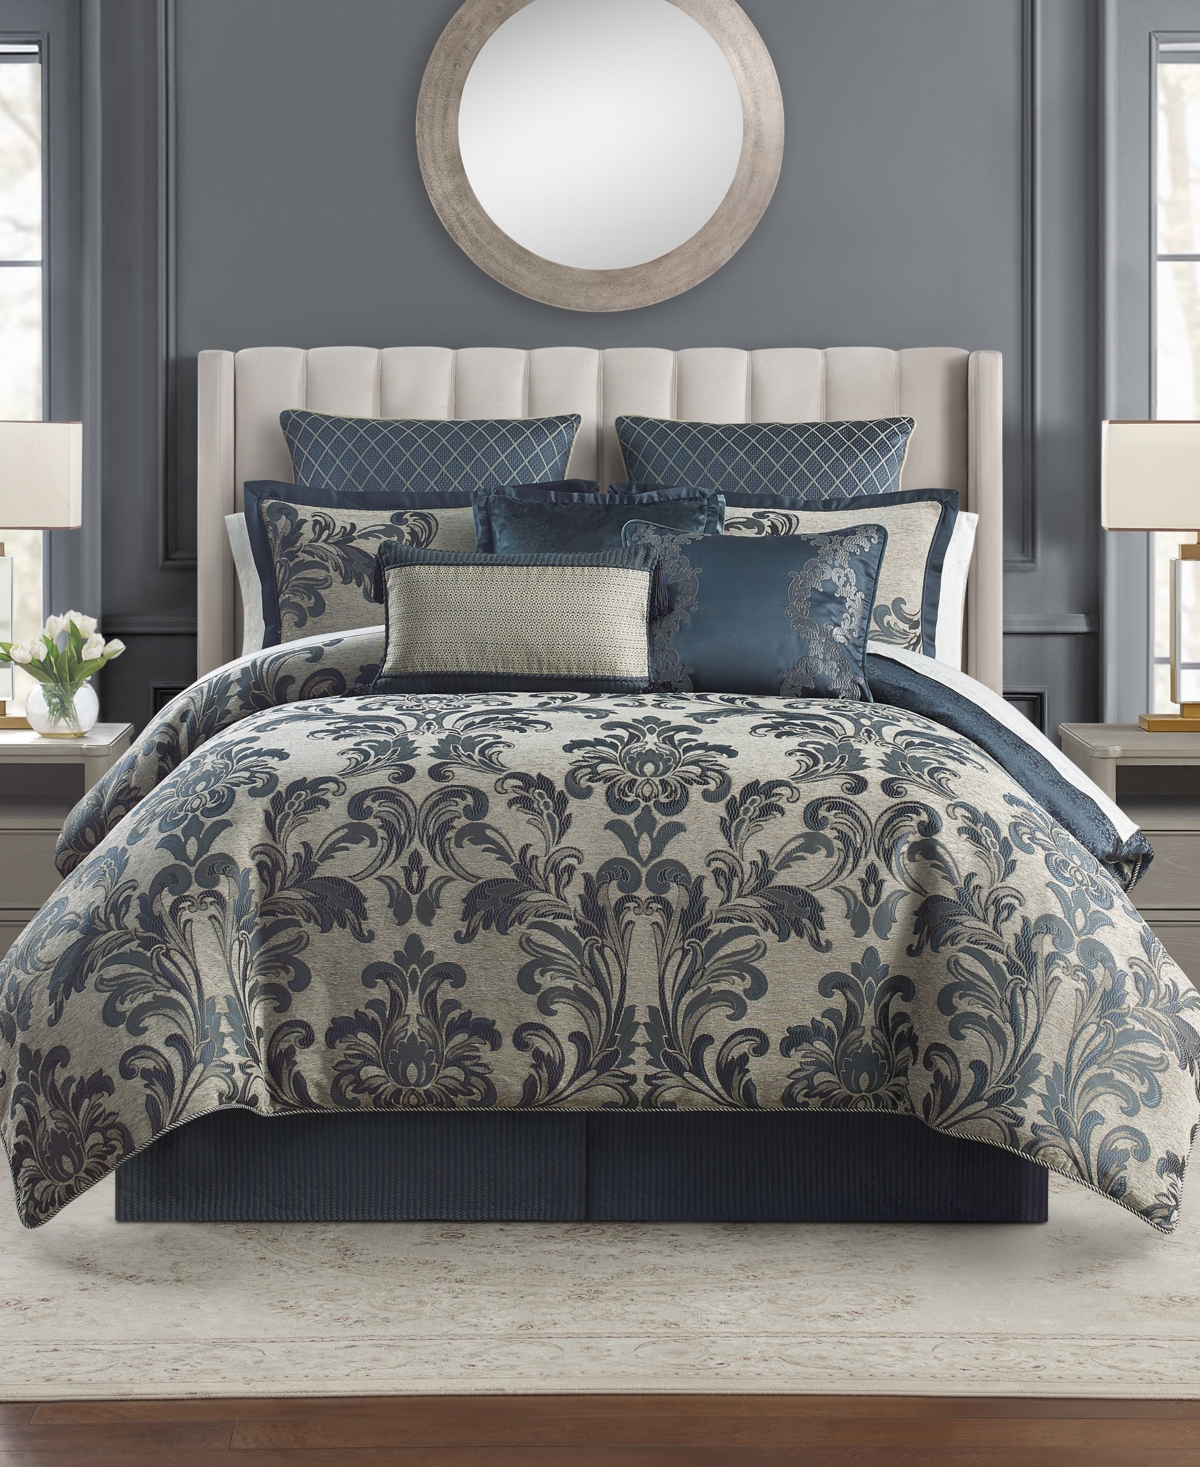 Waterford Everett 6 Piece Comforter Set, California King In Teal